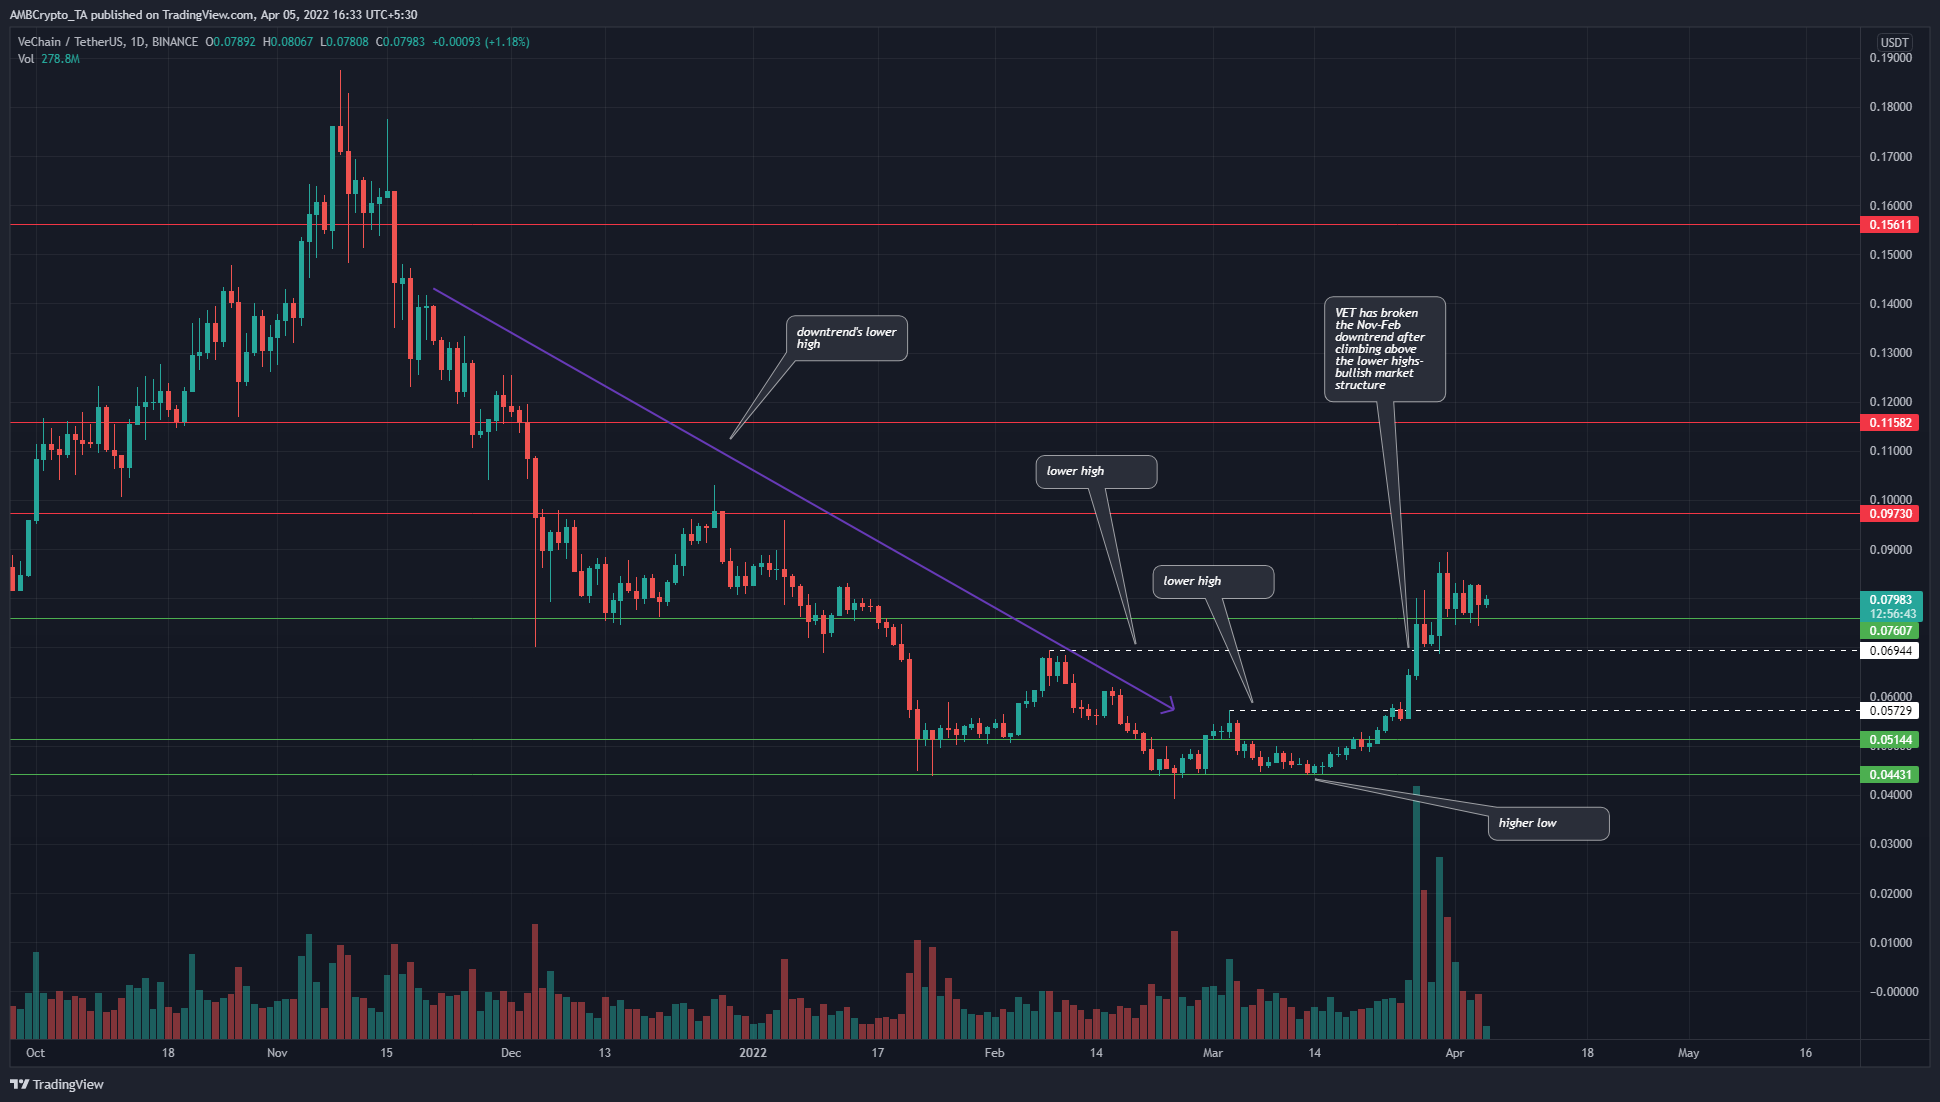 VeChain has a long-term bullish structure once again, and sets its sights on the $0.1 mark